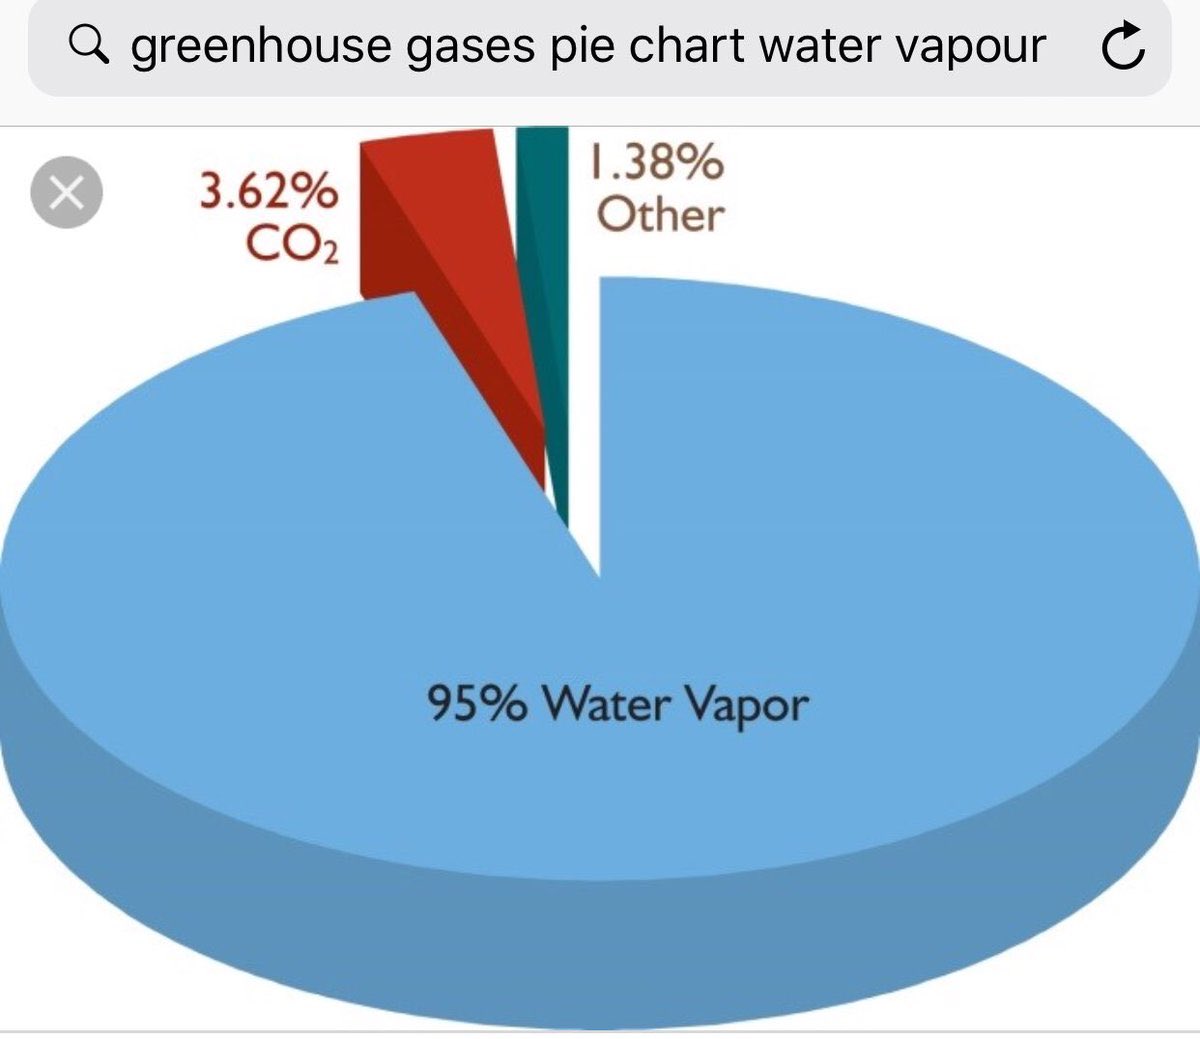 Climate Realists The Main Greenhouse In Our Atmosphere Is Water Vapour At 95 The Proportion Of Co2 Is Much Smaller At Approximately 3 5 The Reporting Of The Annual Increase Of